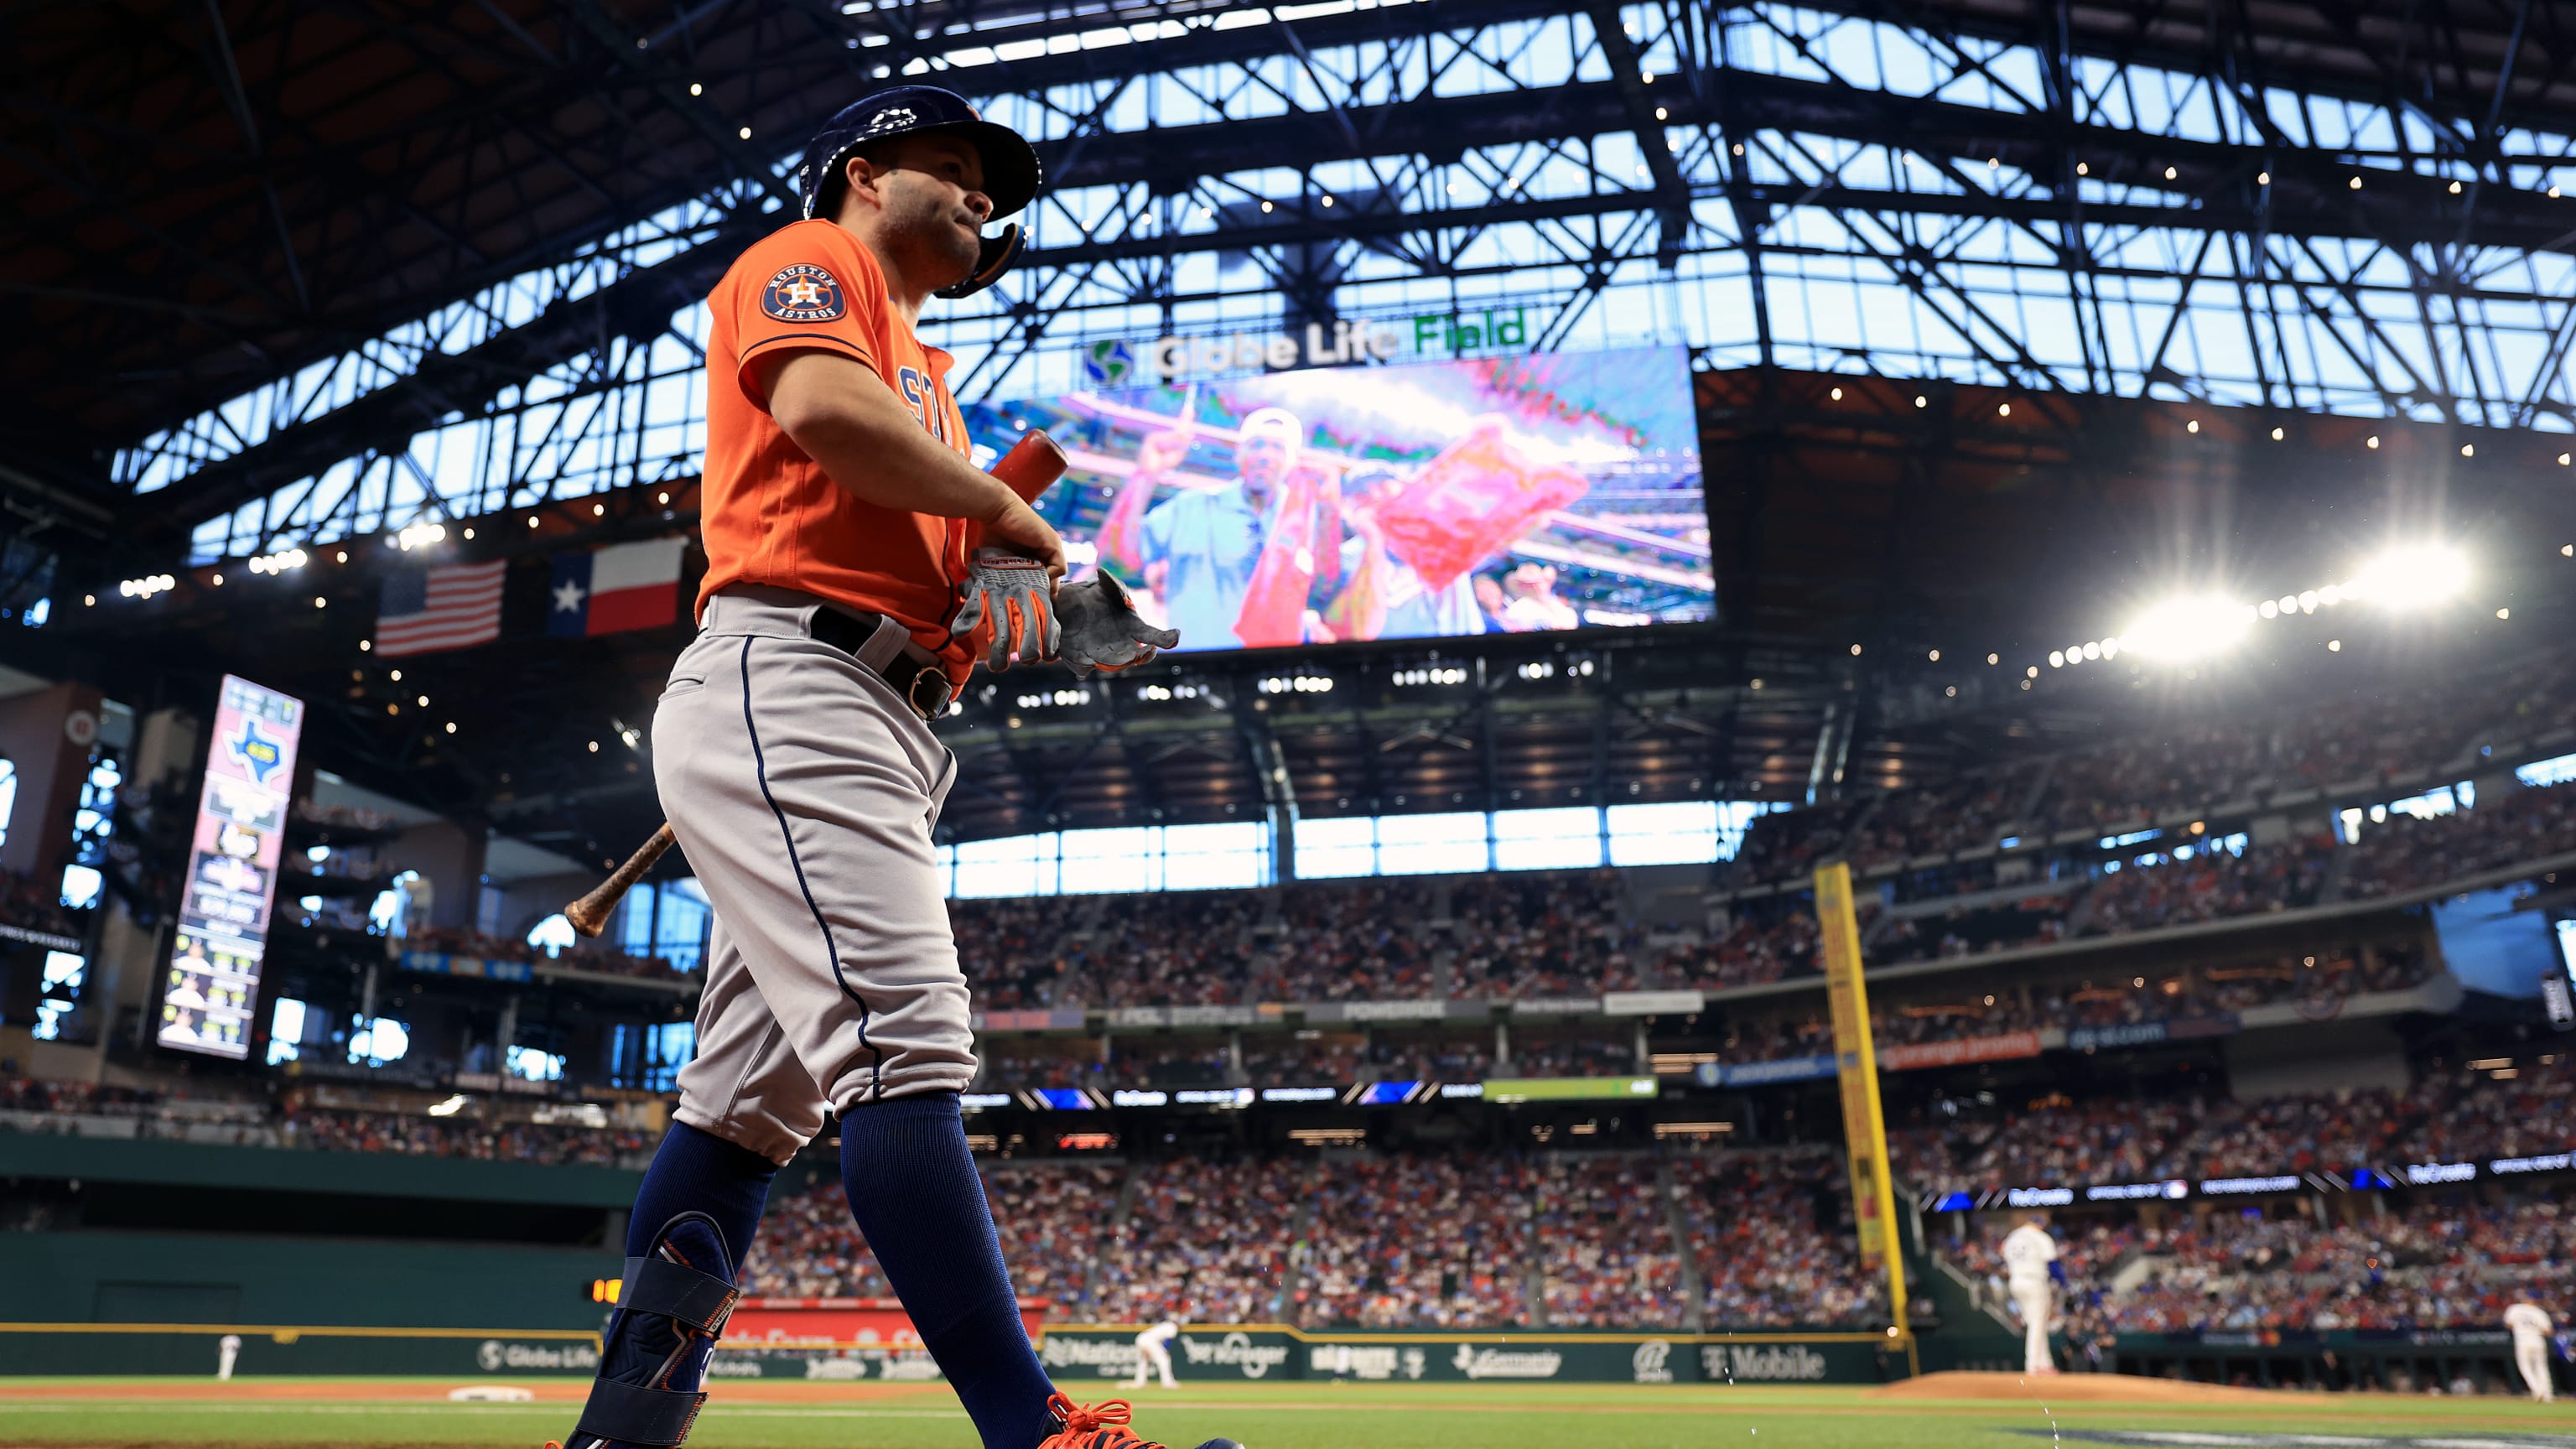 Rangers, Astros involved in benches-clearing brouhaha after Adolis Garcia  grand slam